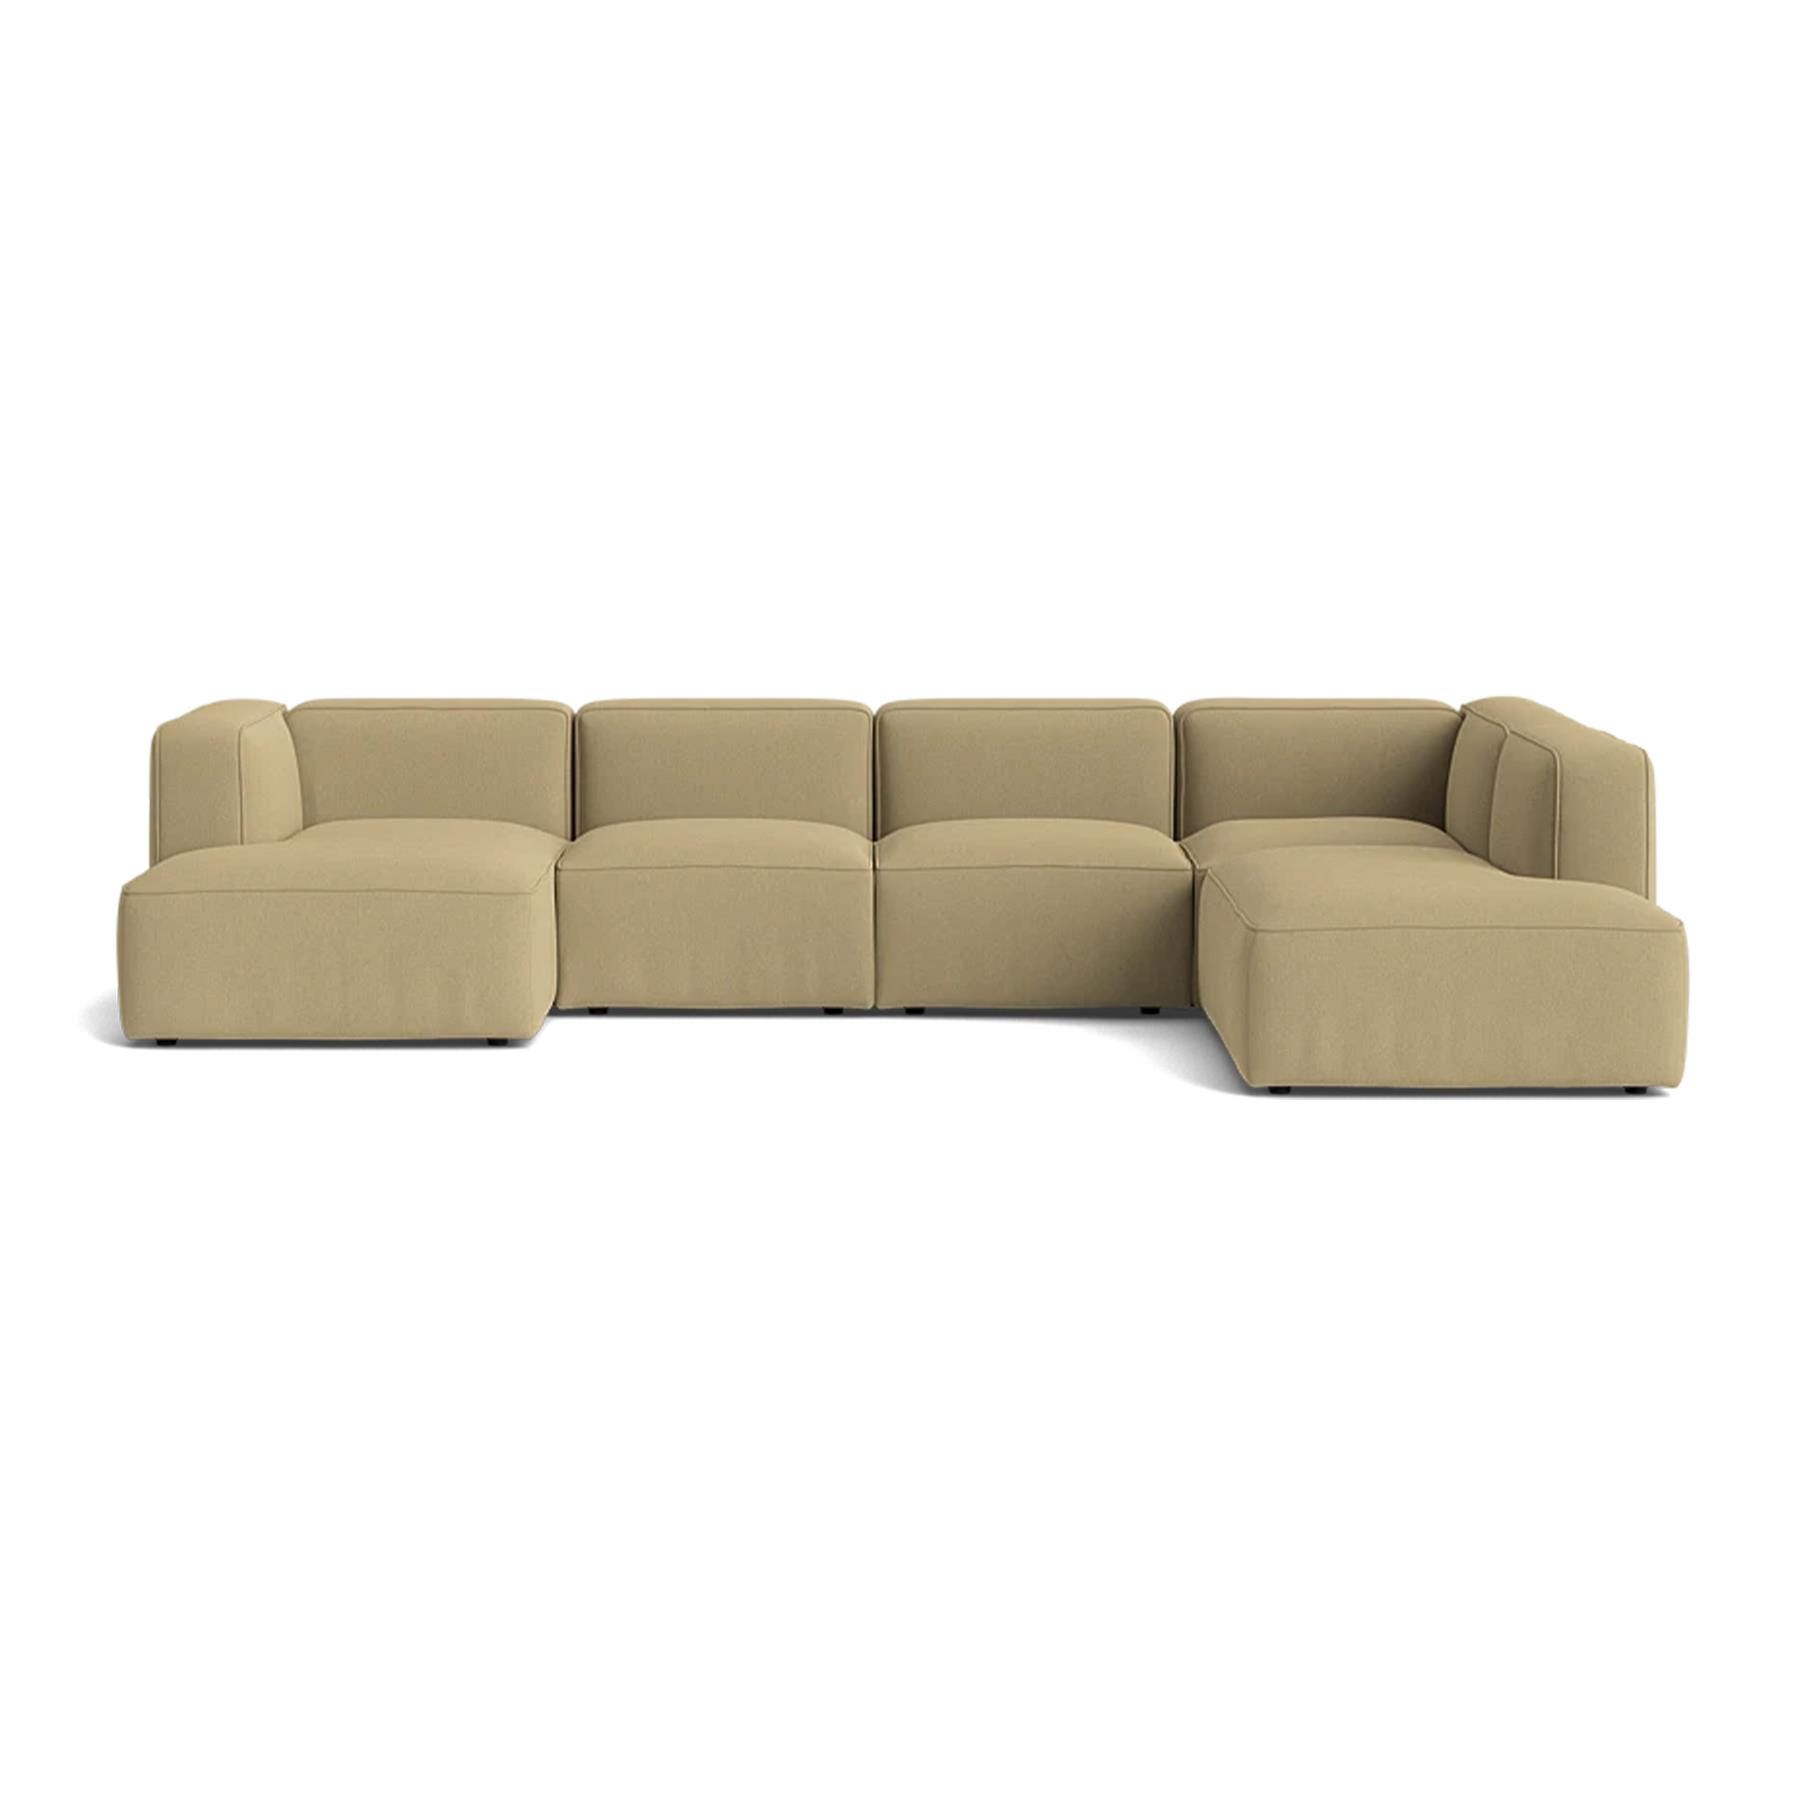 Make Nordic Basecamp Family Sofa Fiord 422 Left Yellow Designer Furniture From Holloways Of Ludlow